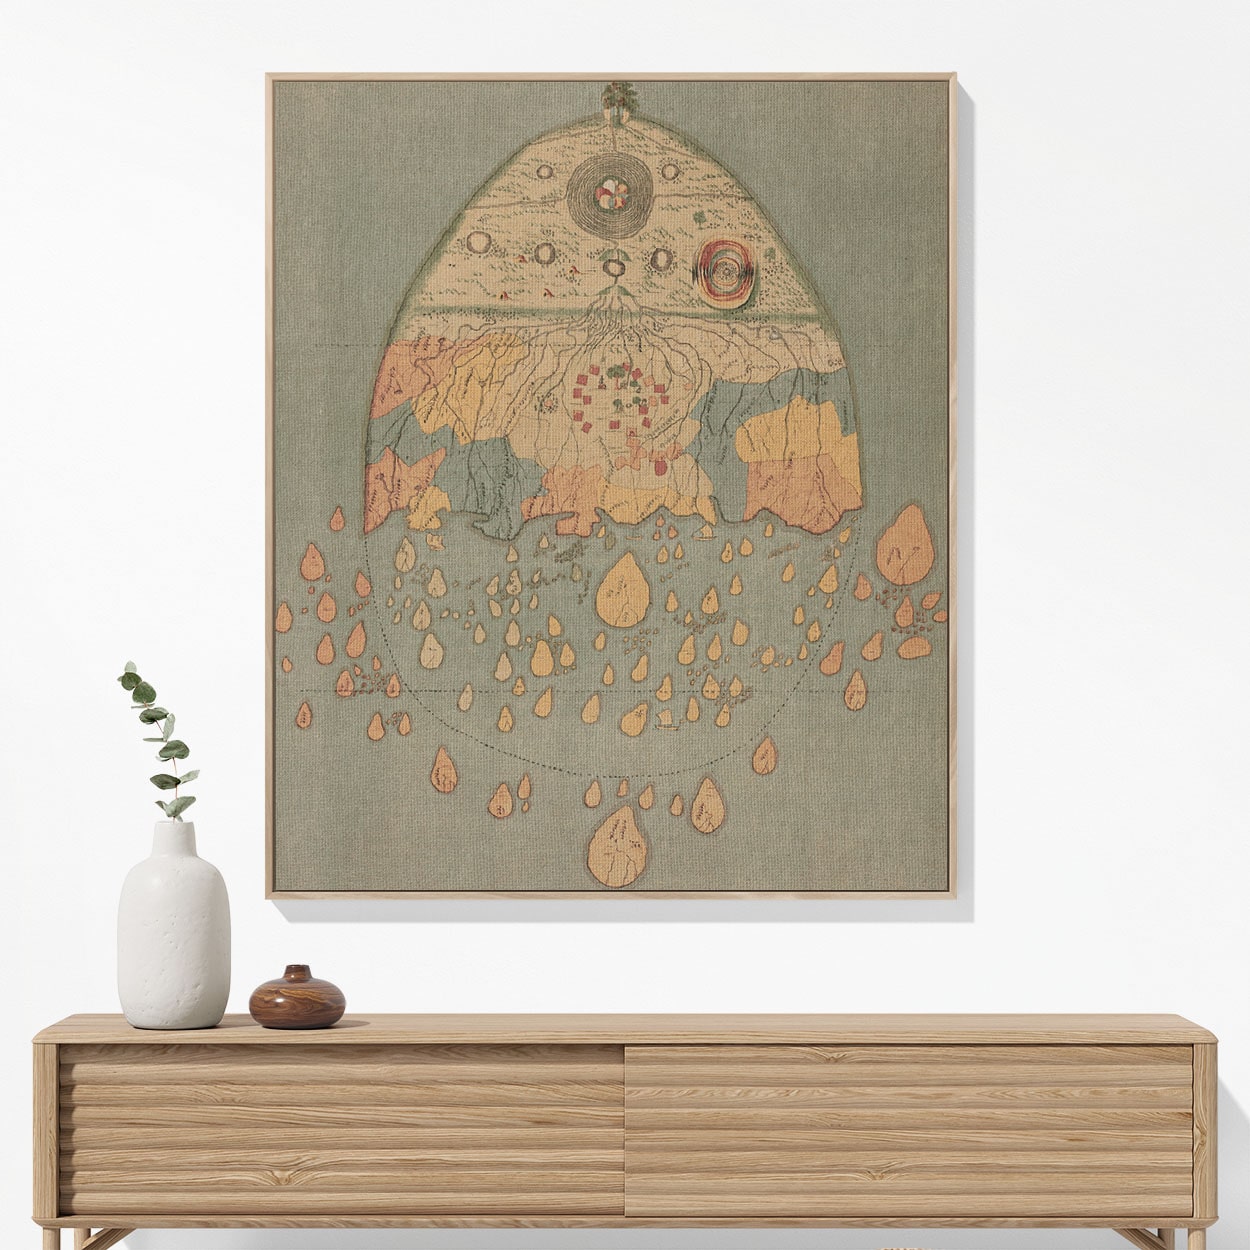 Aincent Drawing of the Earth Woven Blanket Woven Blanket Hanging on a Wall as Framed Wall Art